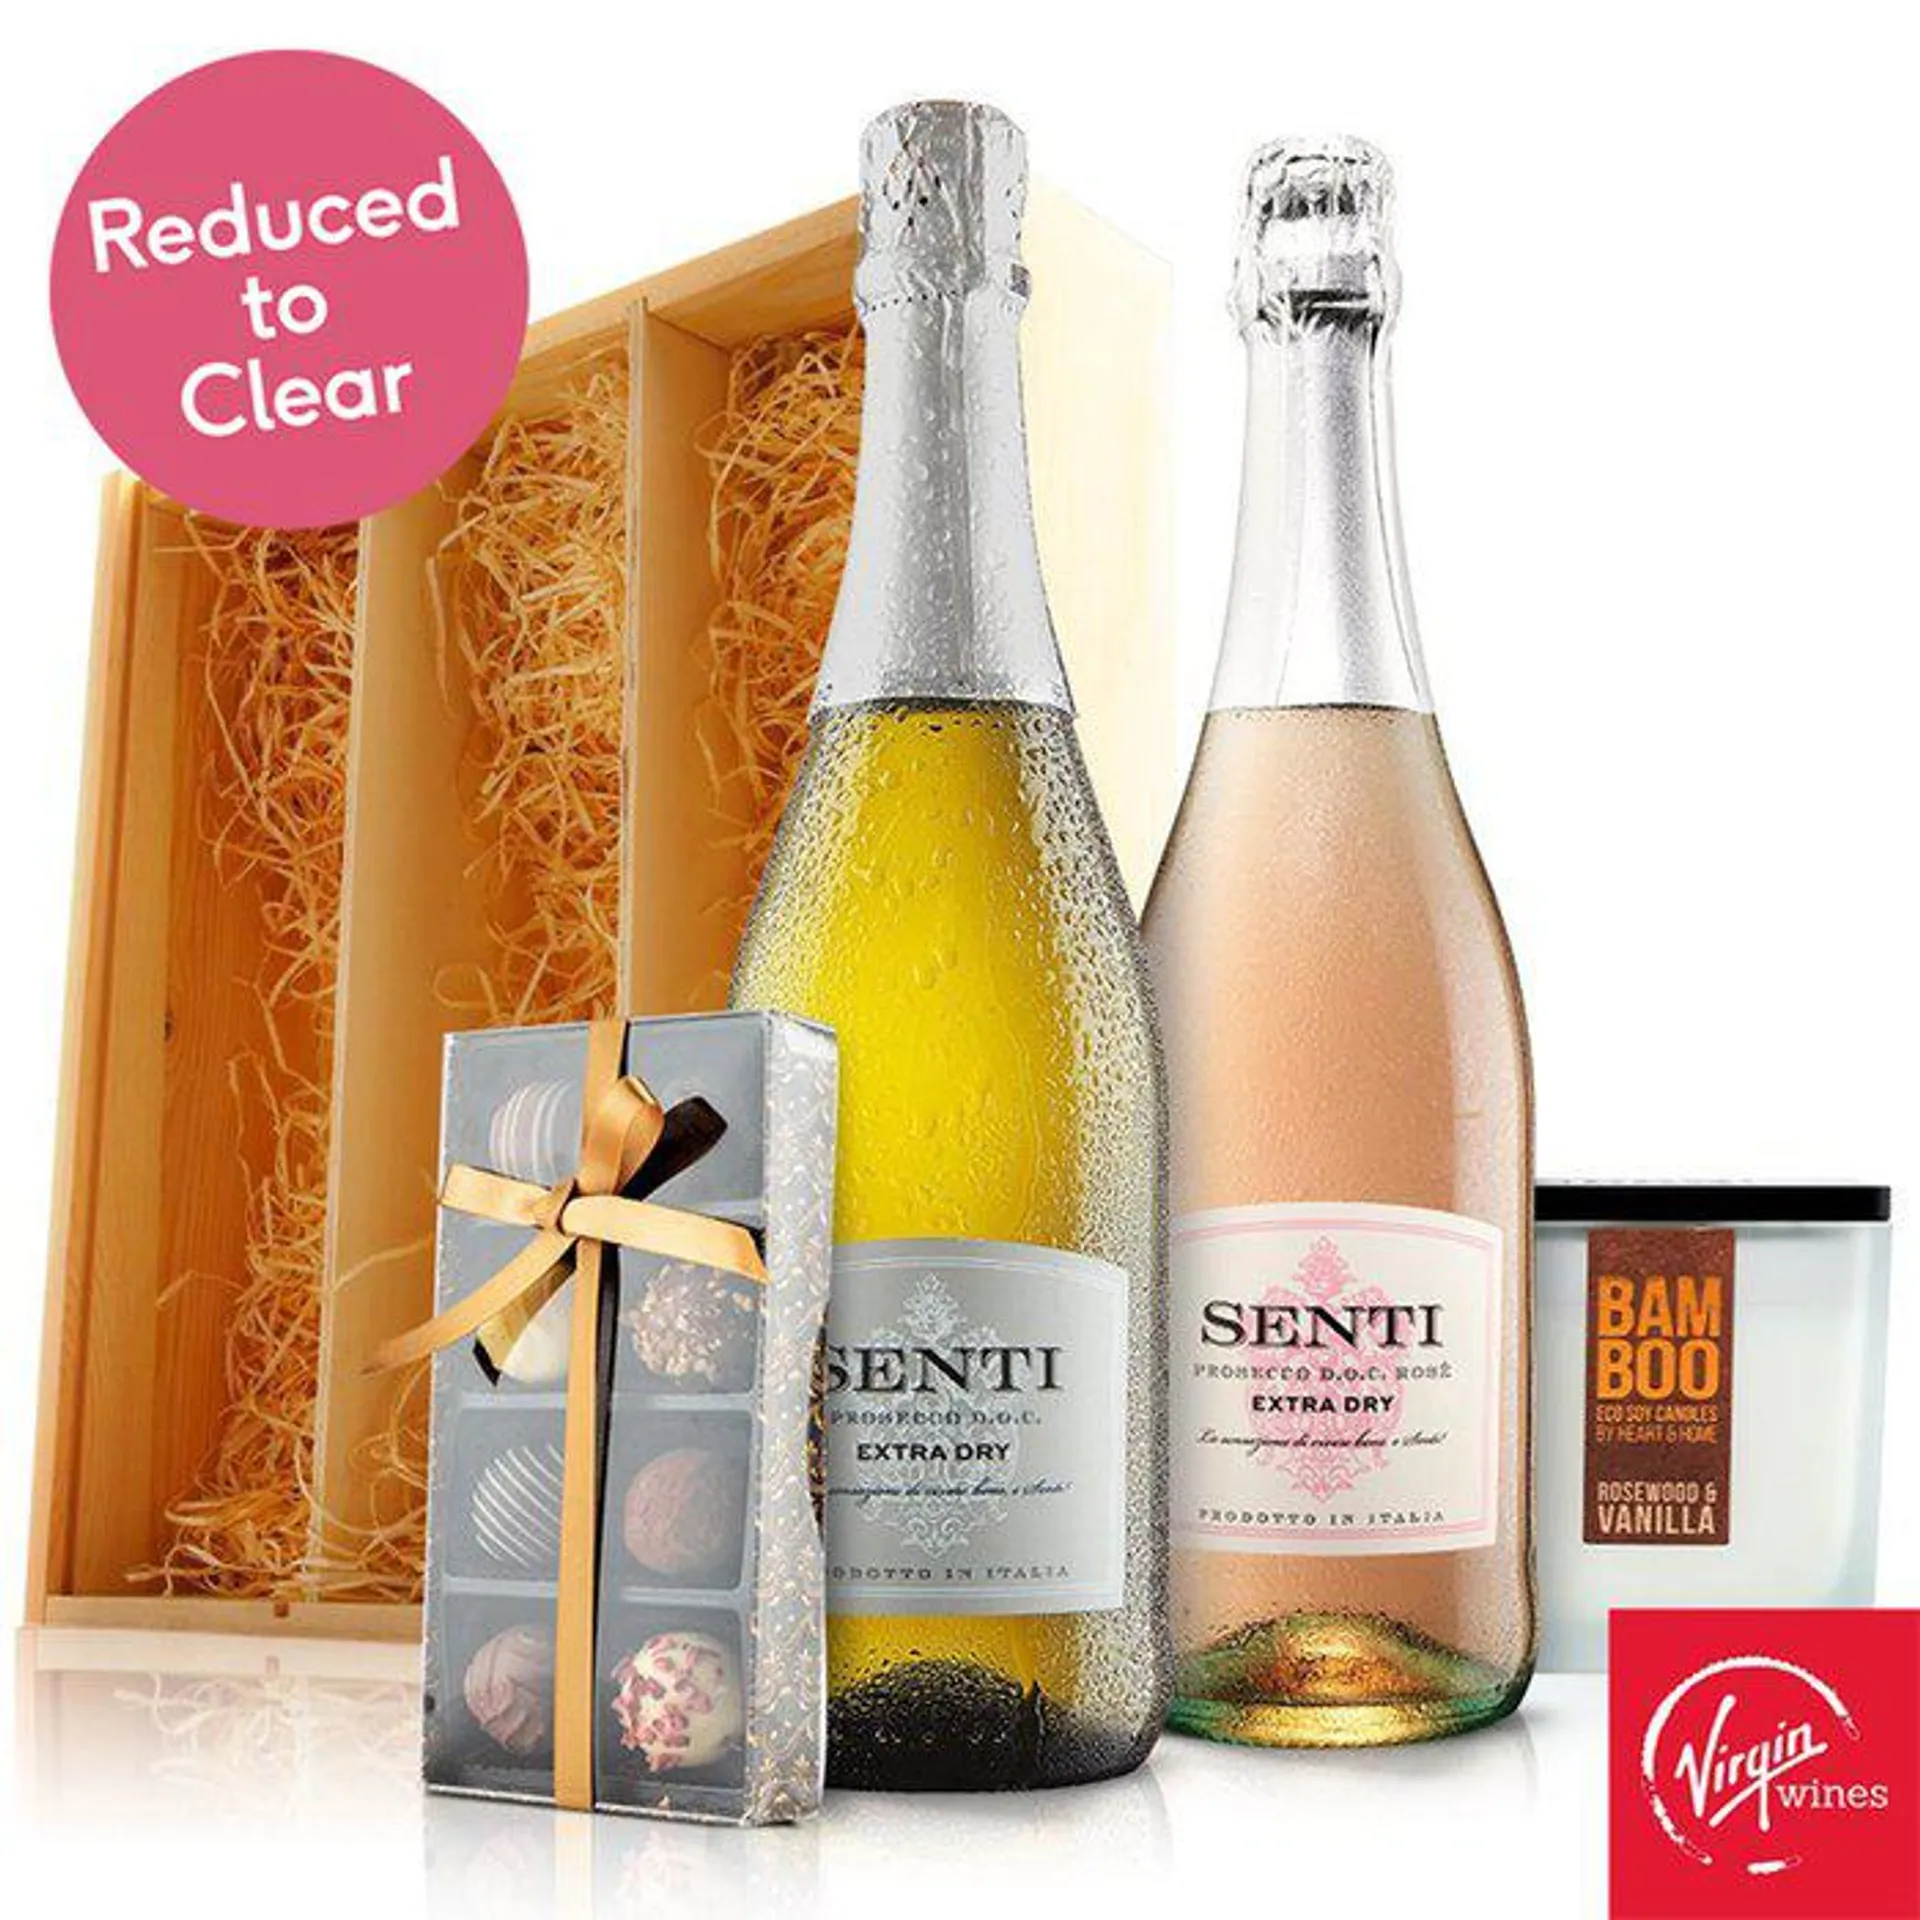 Virgin Wines Prosecco Duo, Chocolates and Candle in Wooden Gift Box